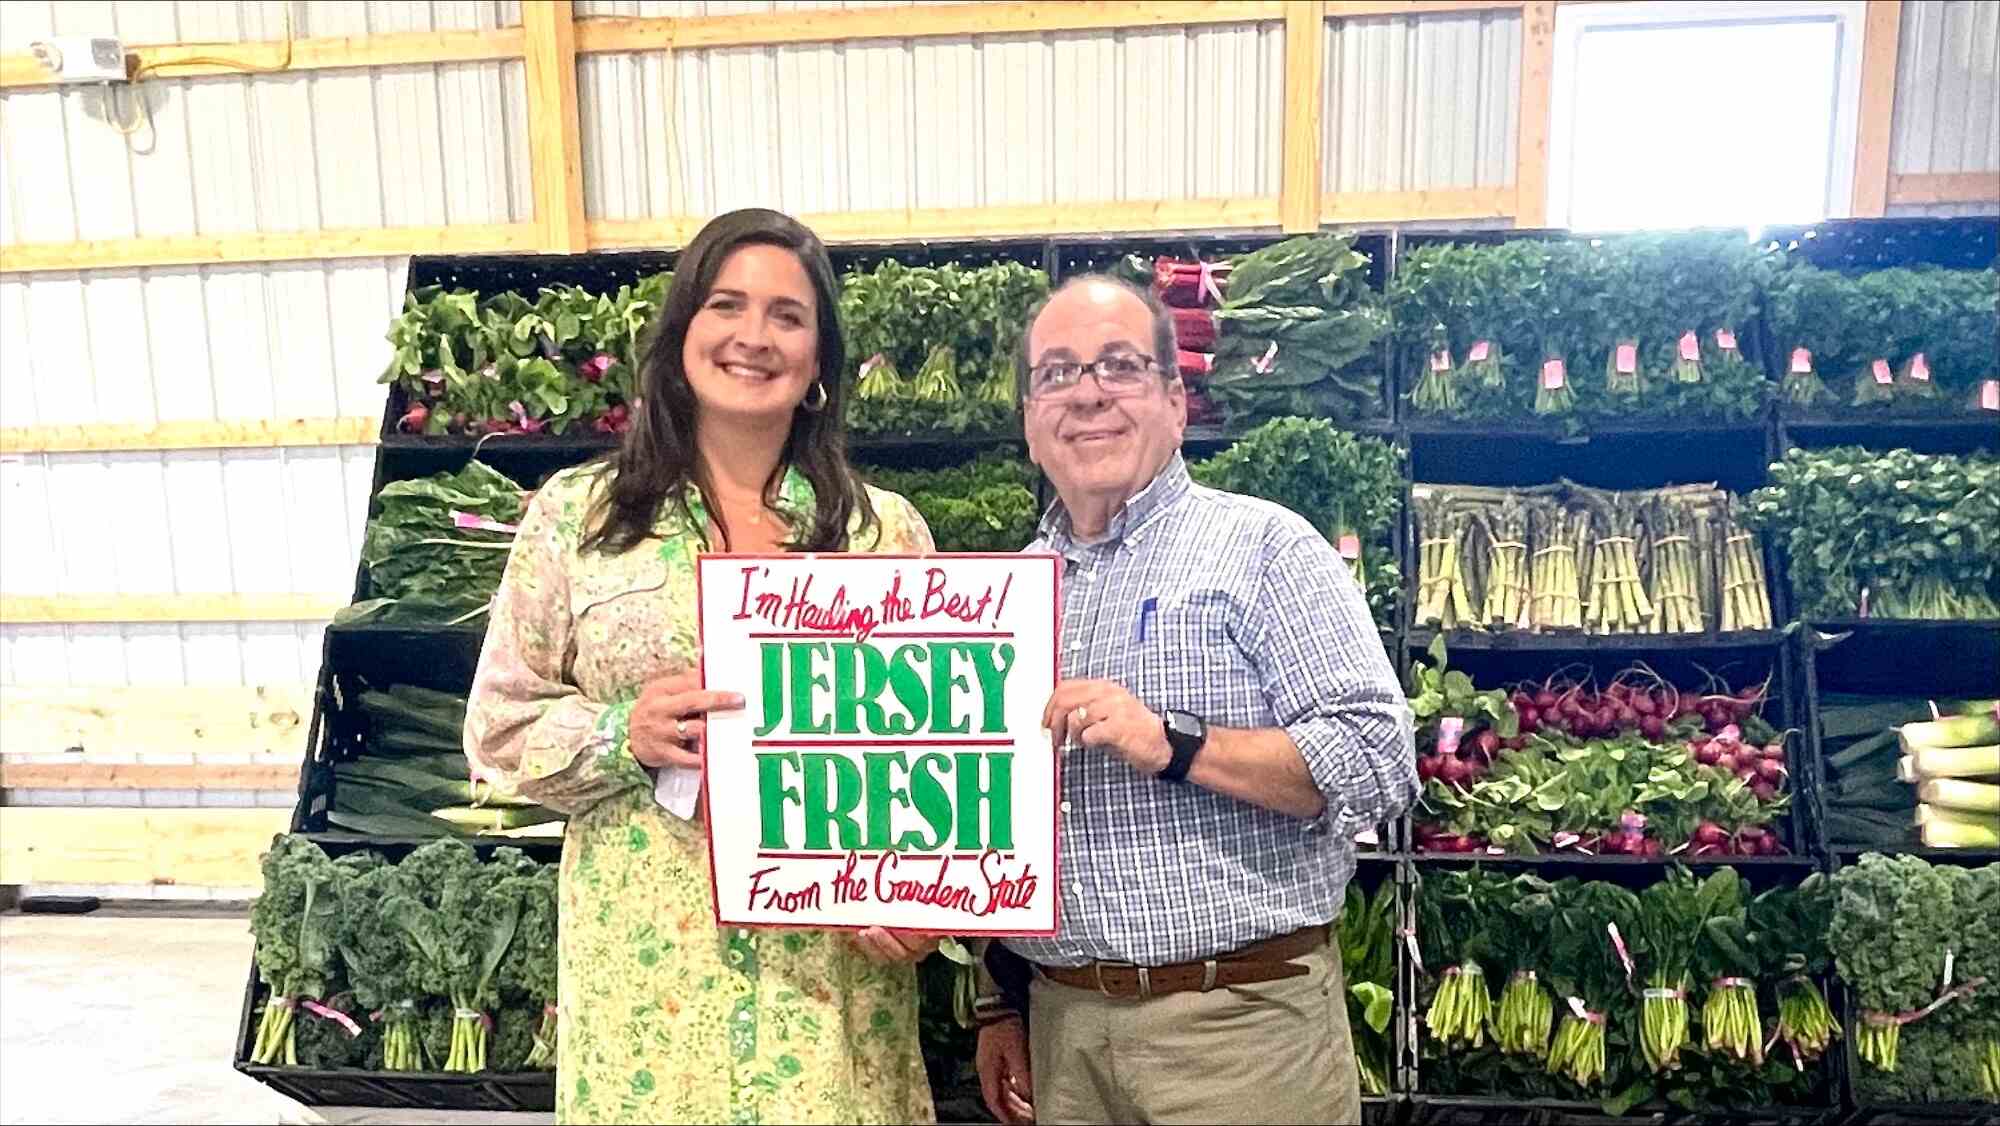 Lods and Romero in front of produce holding a Jersey Fresh sign